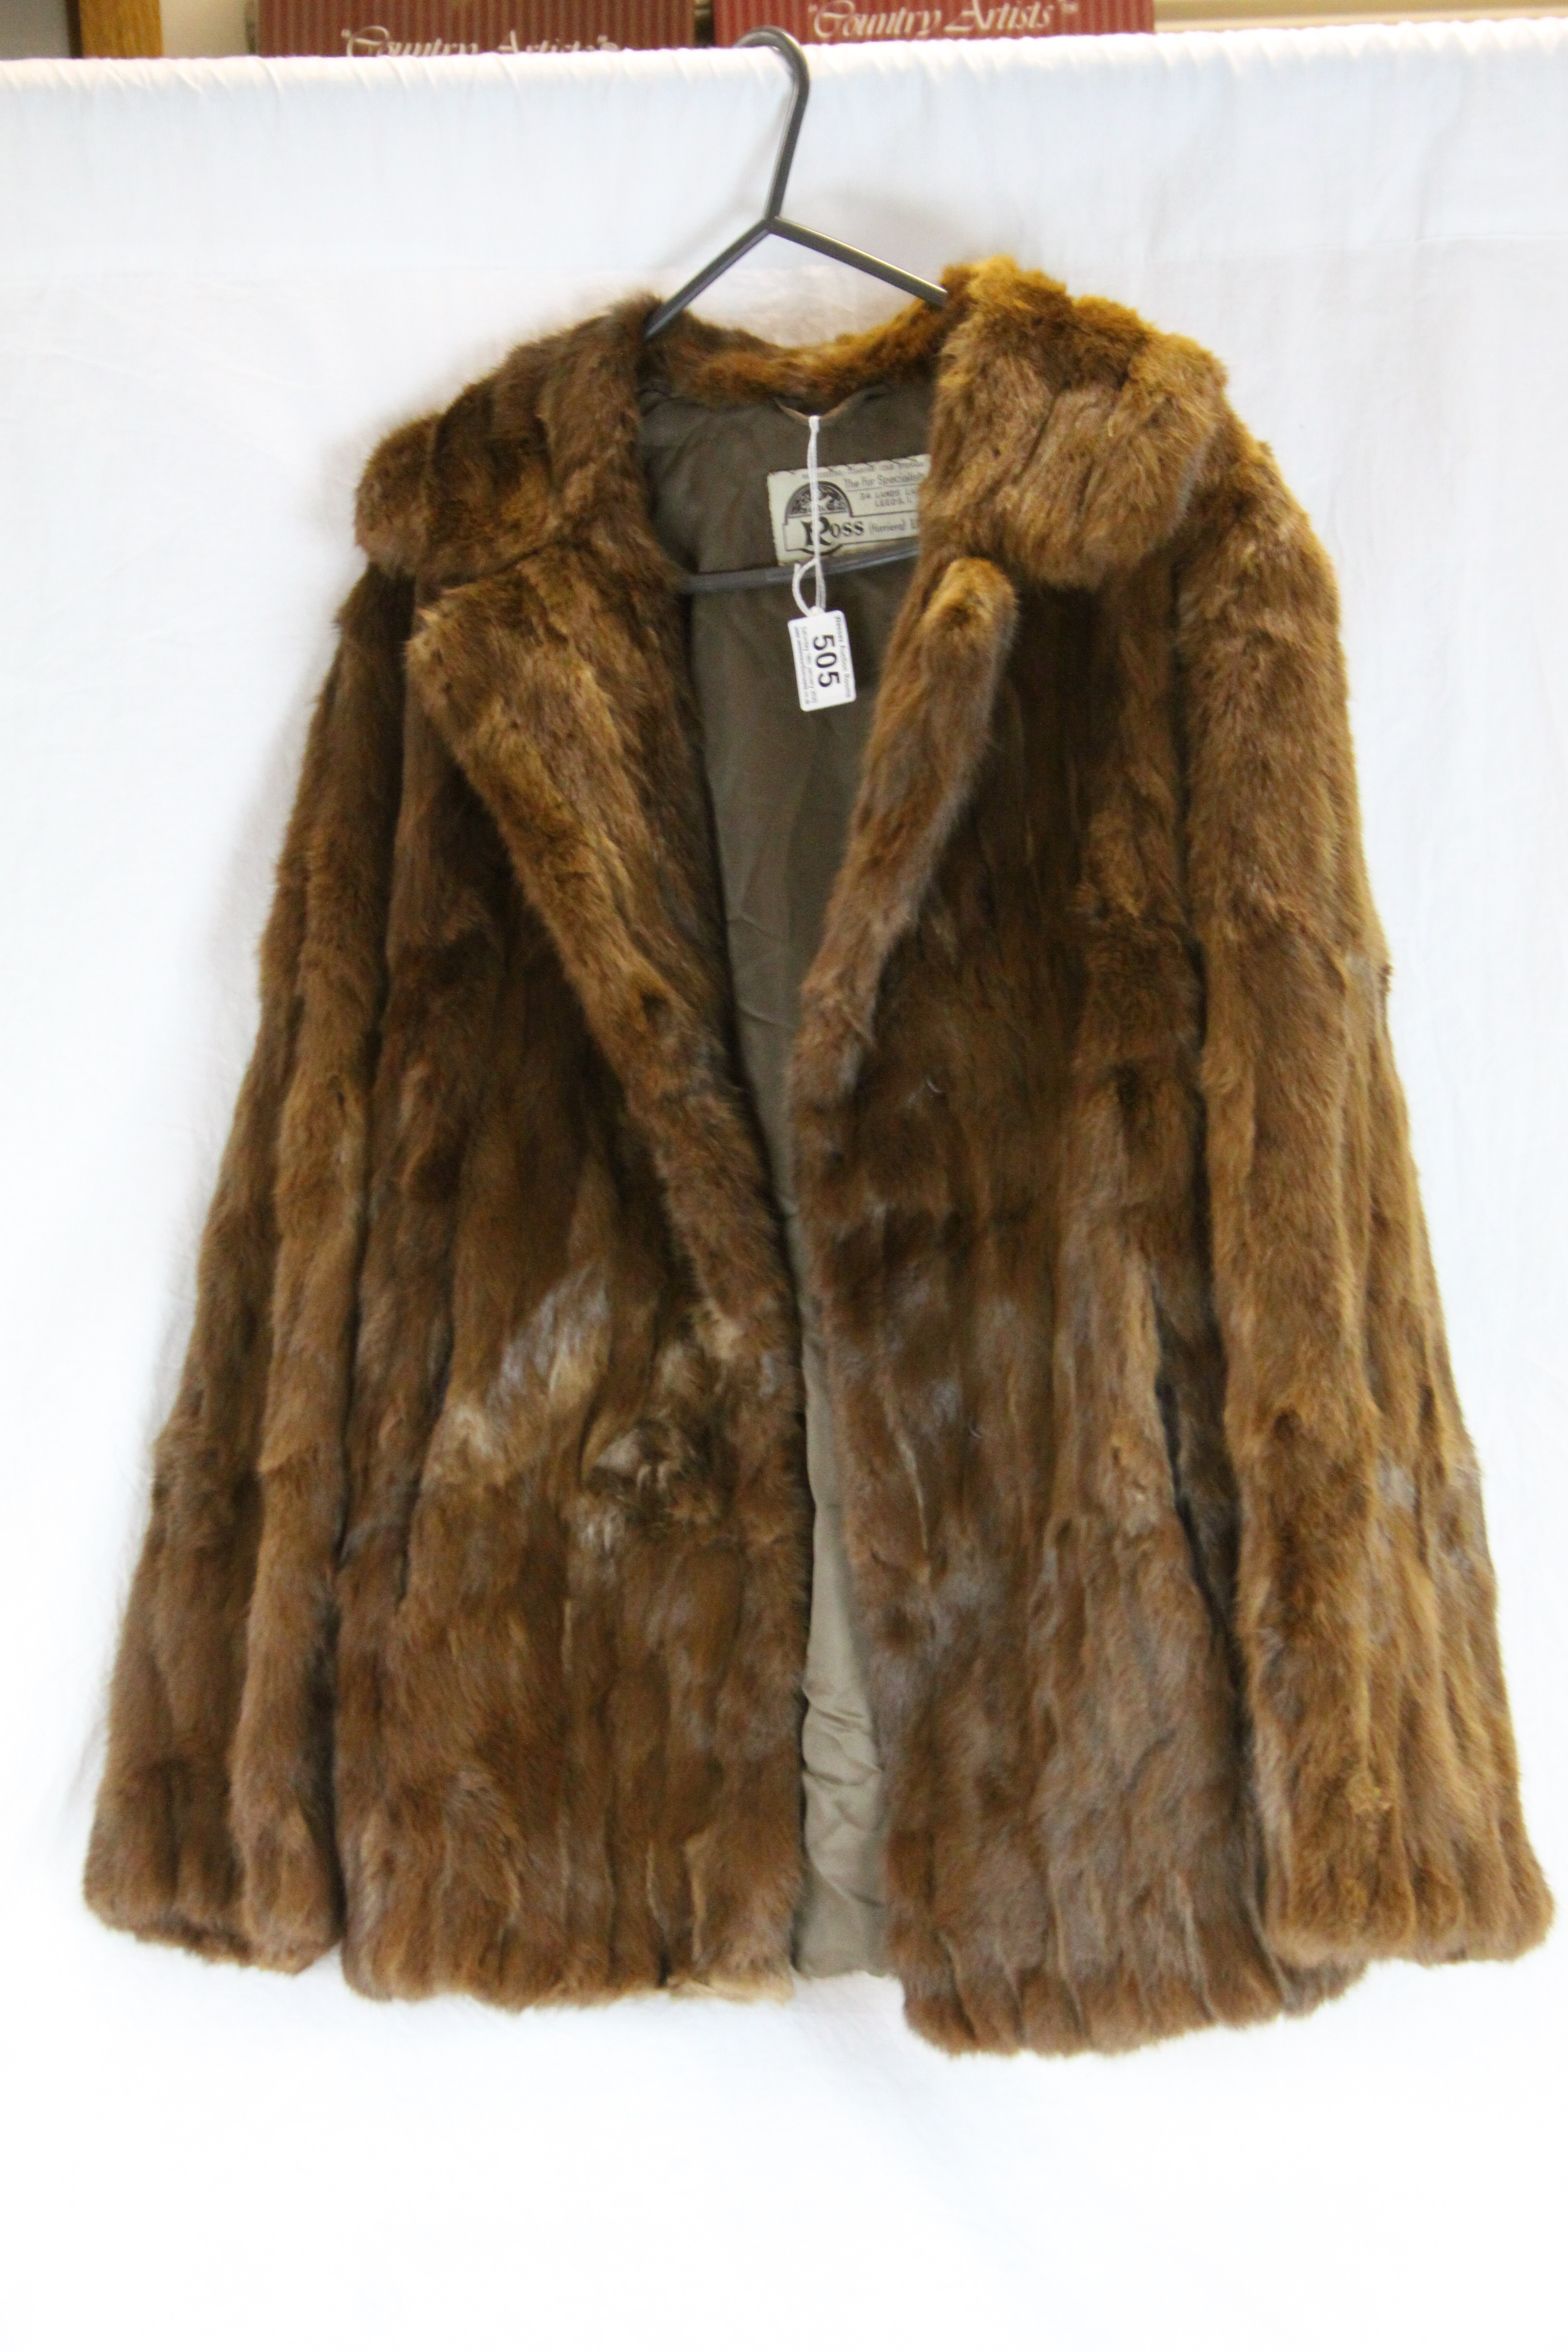 Vintage red squirrel fur coat with Ross Furriers of Leeds label, hook and eye fastenings, two